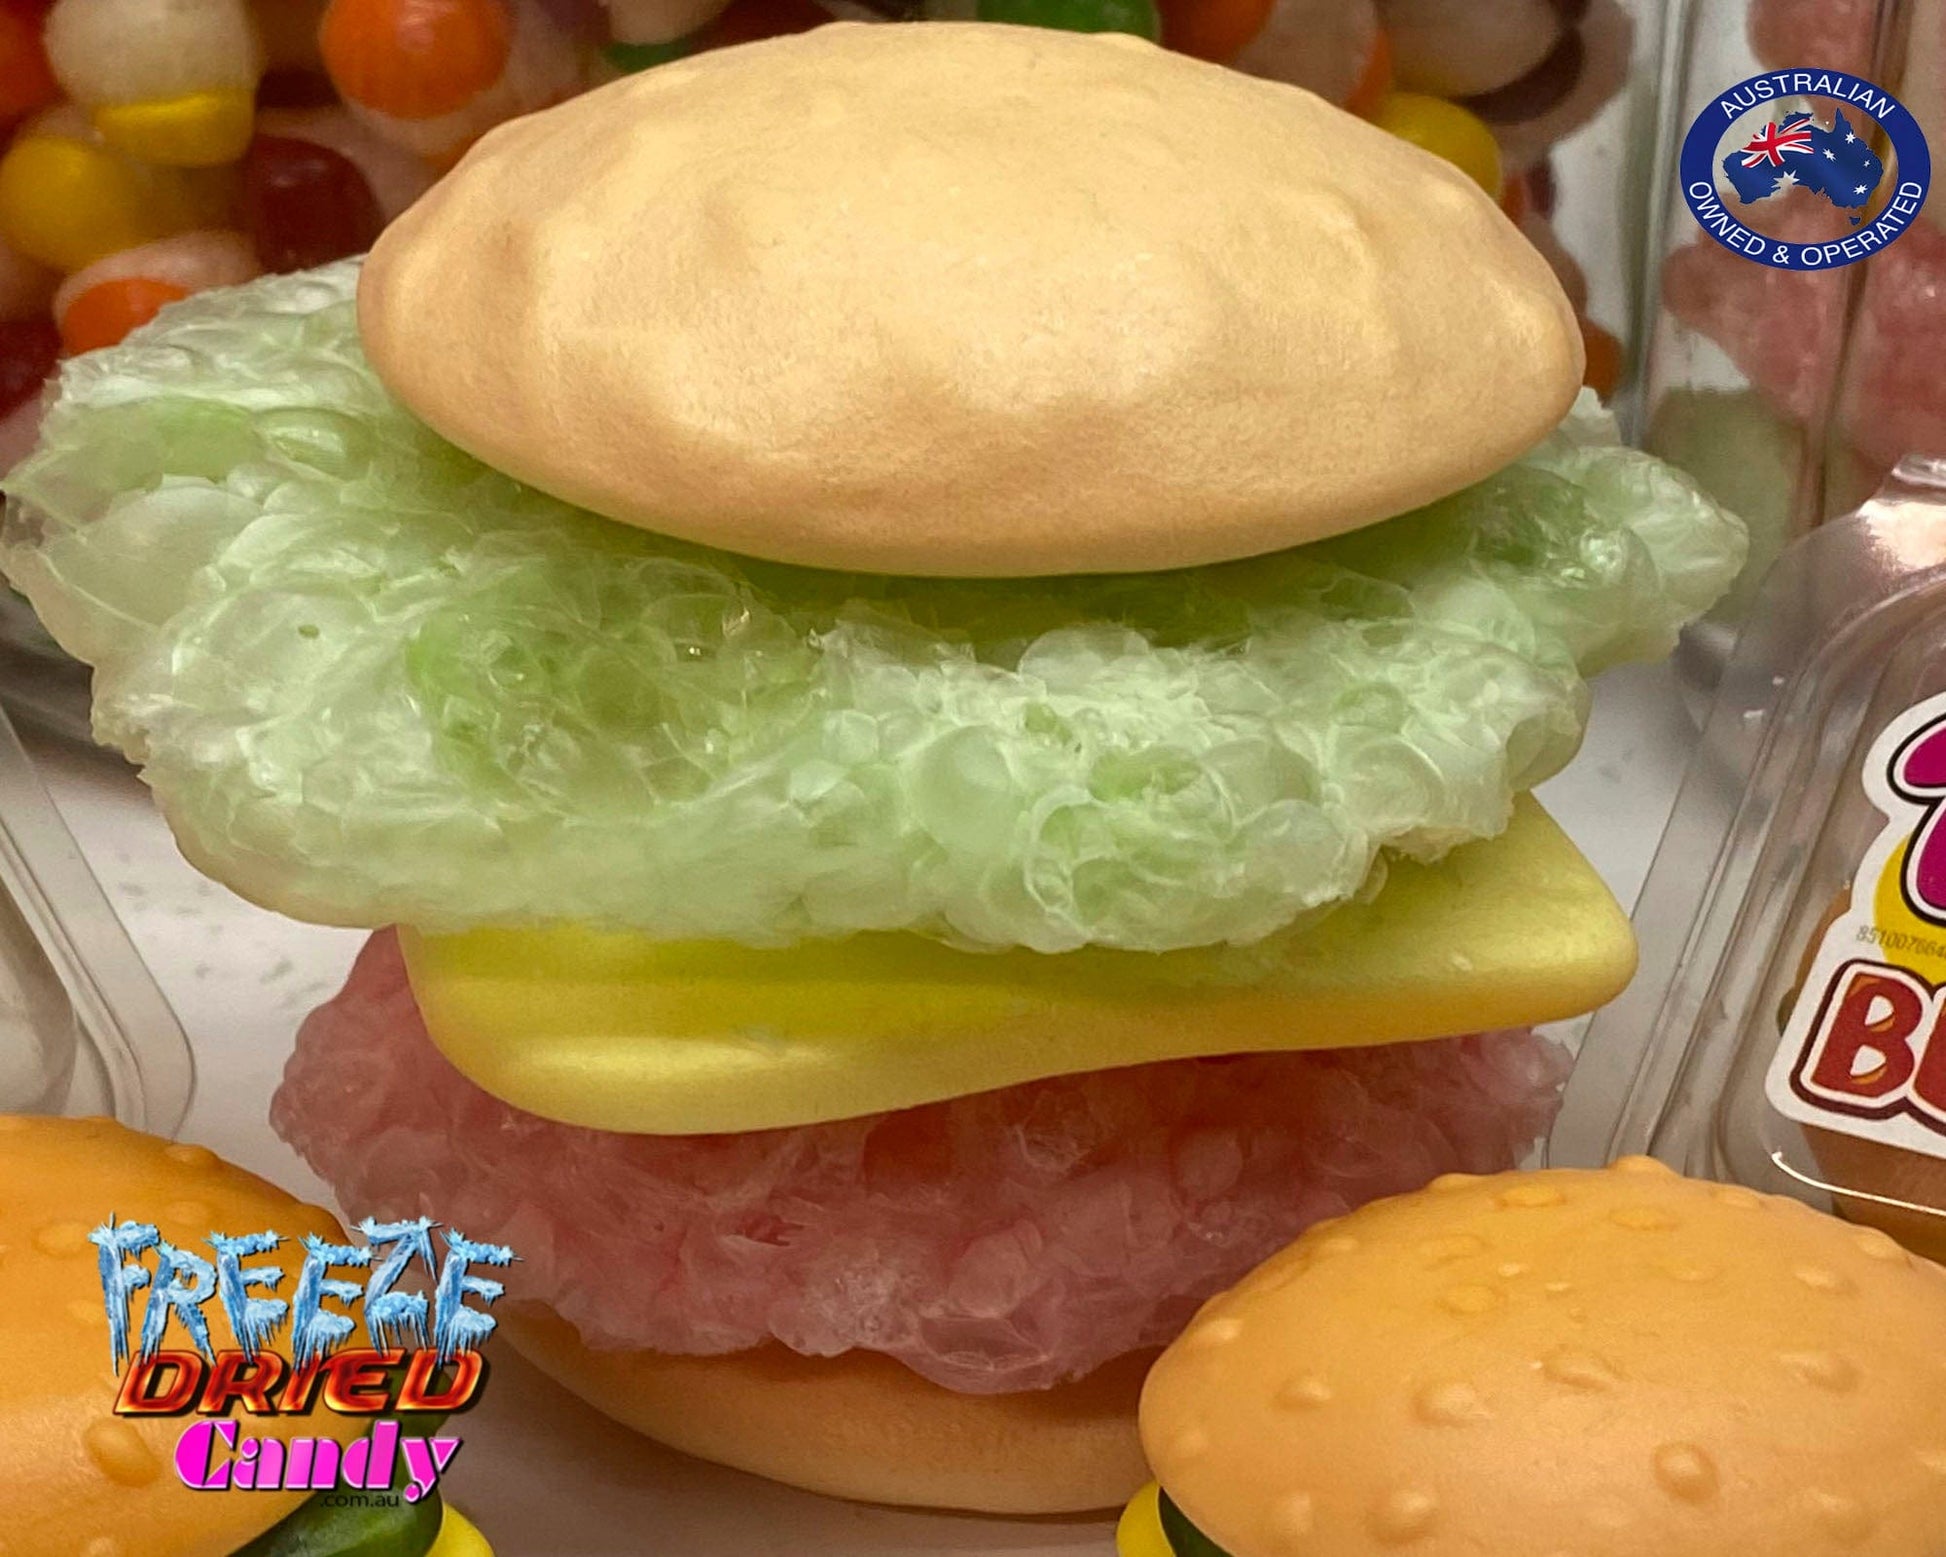 Freeze Dried  XXL Burger by Trolli | Freeze Dried Candy Lollies Sweets treats. Turns from XXL to a Massive Gaint Crunchy Puffy Burger, and oh so tasty.  Made up of five delicious layers: a bread roll top, salad, cheese, meat, and a bottom bread bun. Each layer is separated and has a different color and fruit flavor. combinations of rhubarb, raspberry, strawberry, pineapple-kiwi-gooseberry with a touch of yoghurt and cream. No-one can resist their original flavour. Bite into one now!